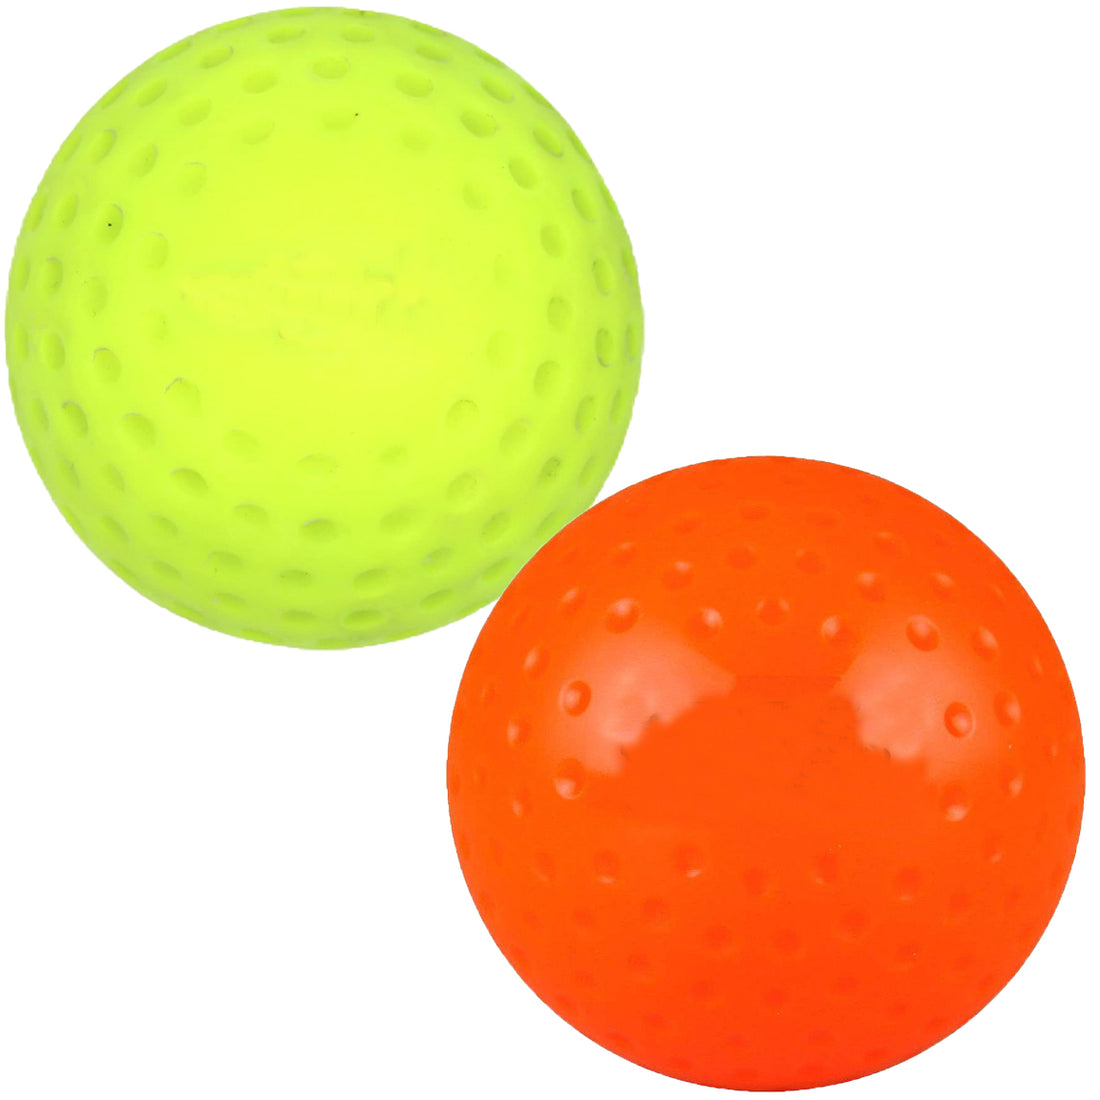 YNR Dimple Hockey Balls Outdoor Sports Practice Training Balls